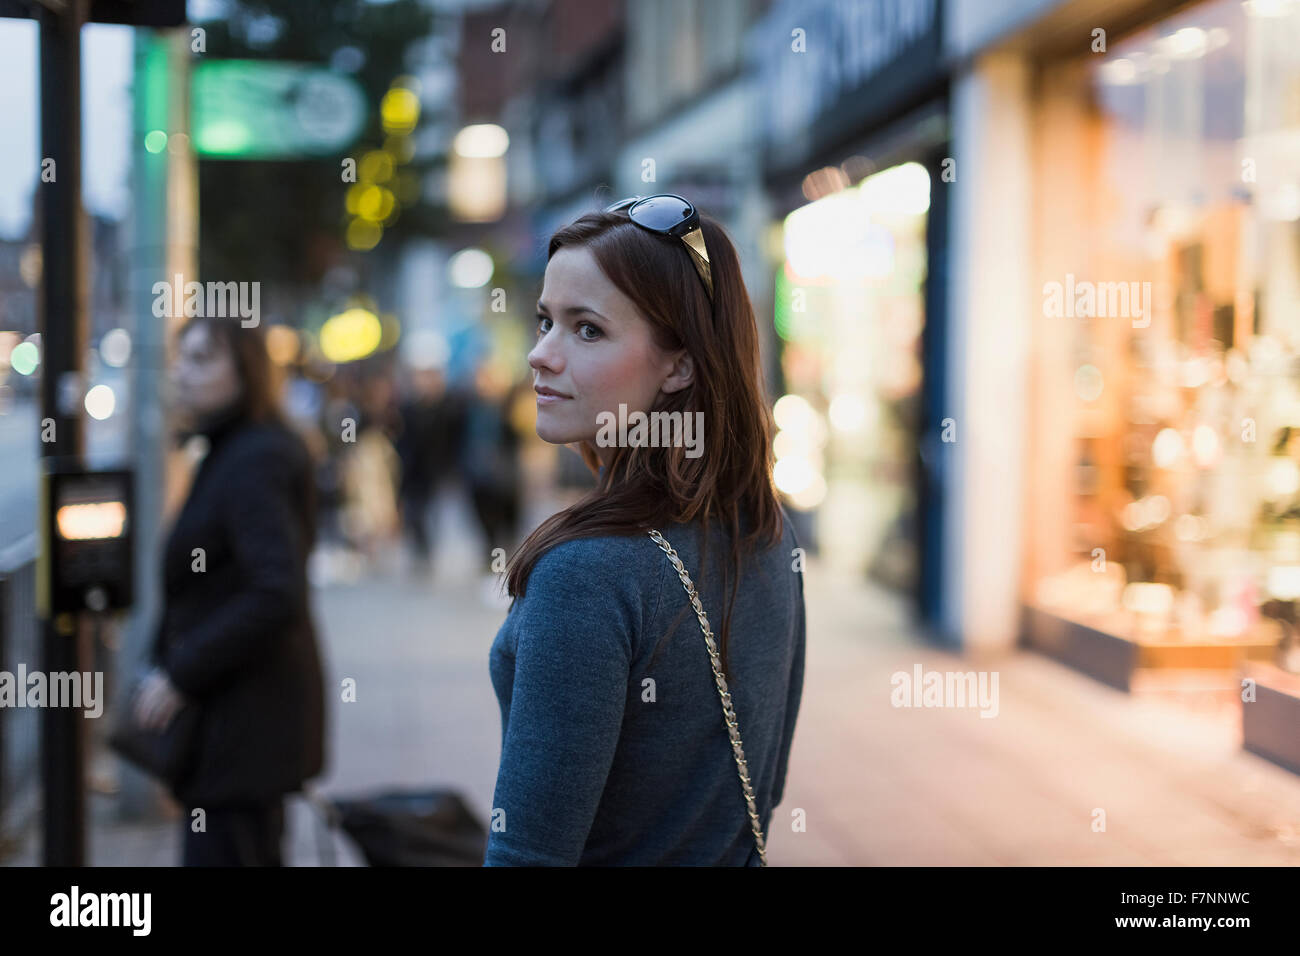 Woman strolling in the city Stock Photo